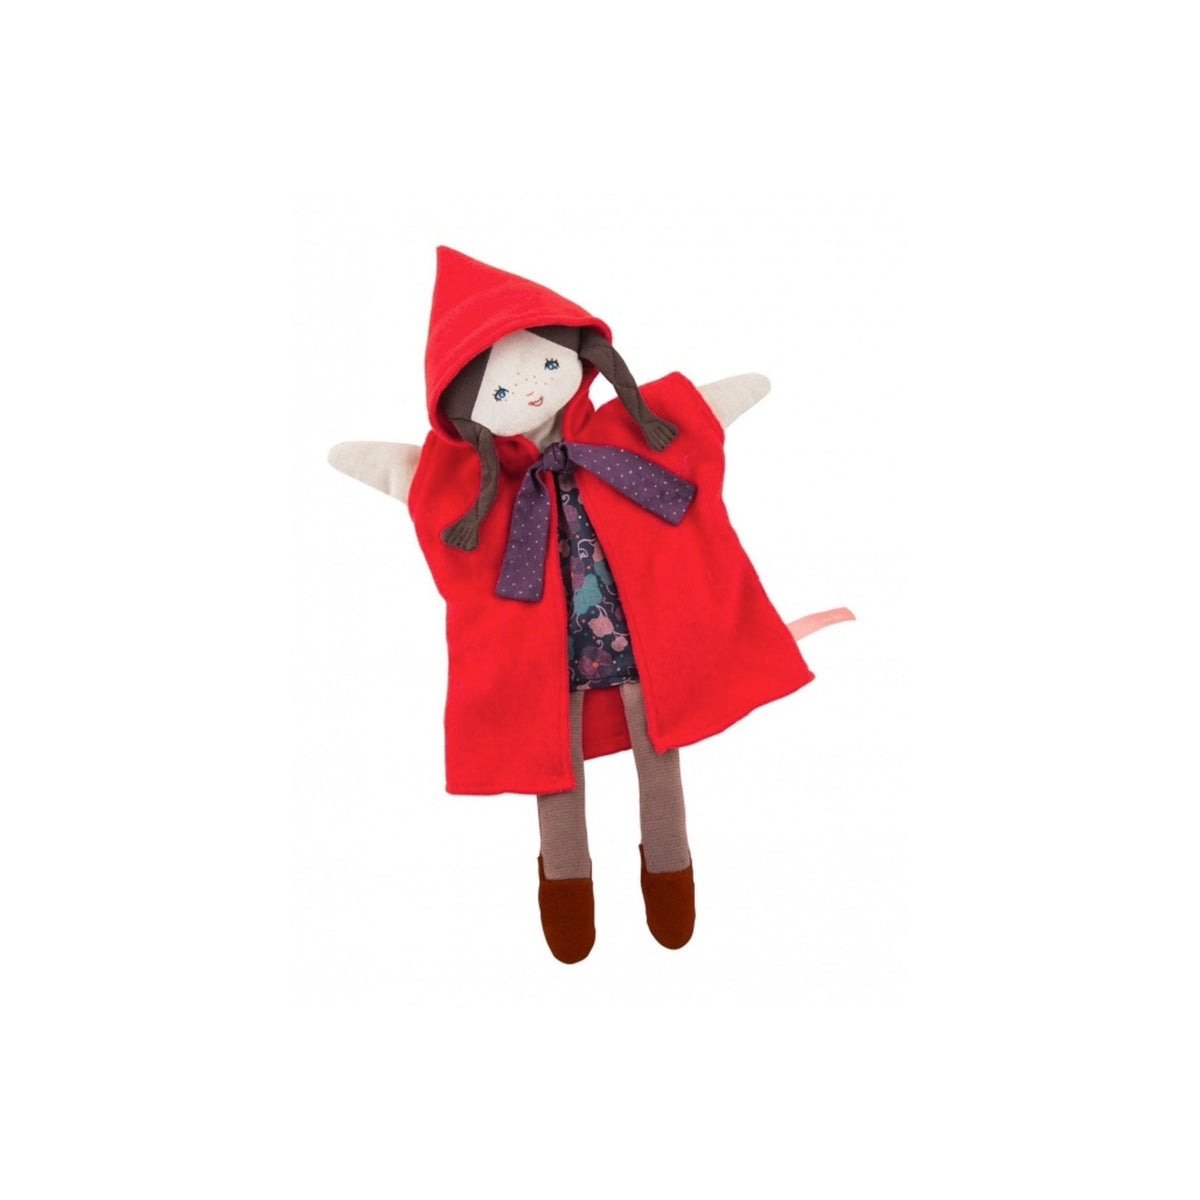 Moulin Roty- Little Red Riding Hood Hand Puppet